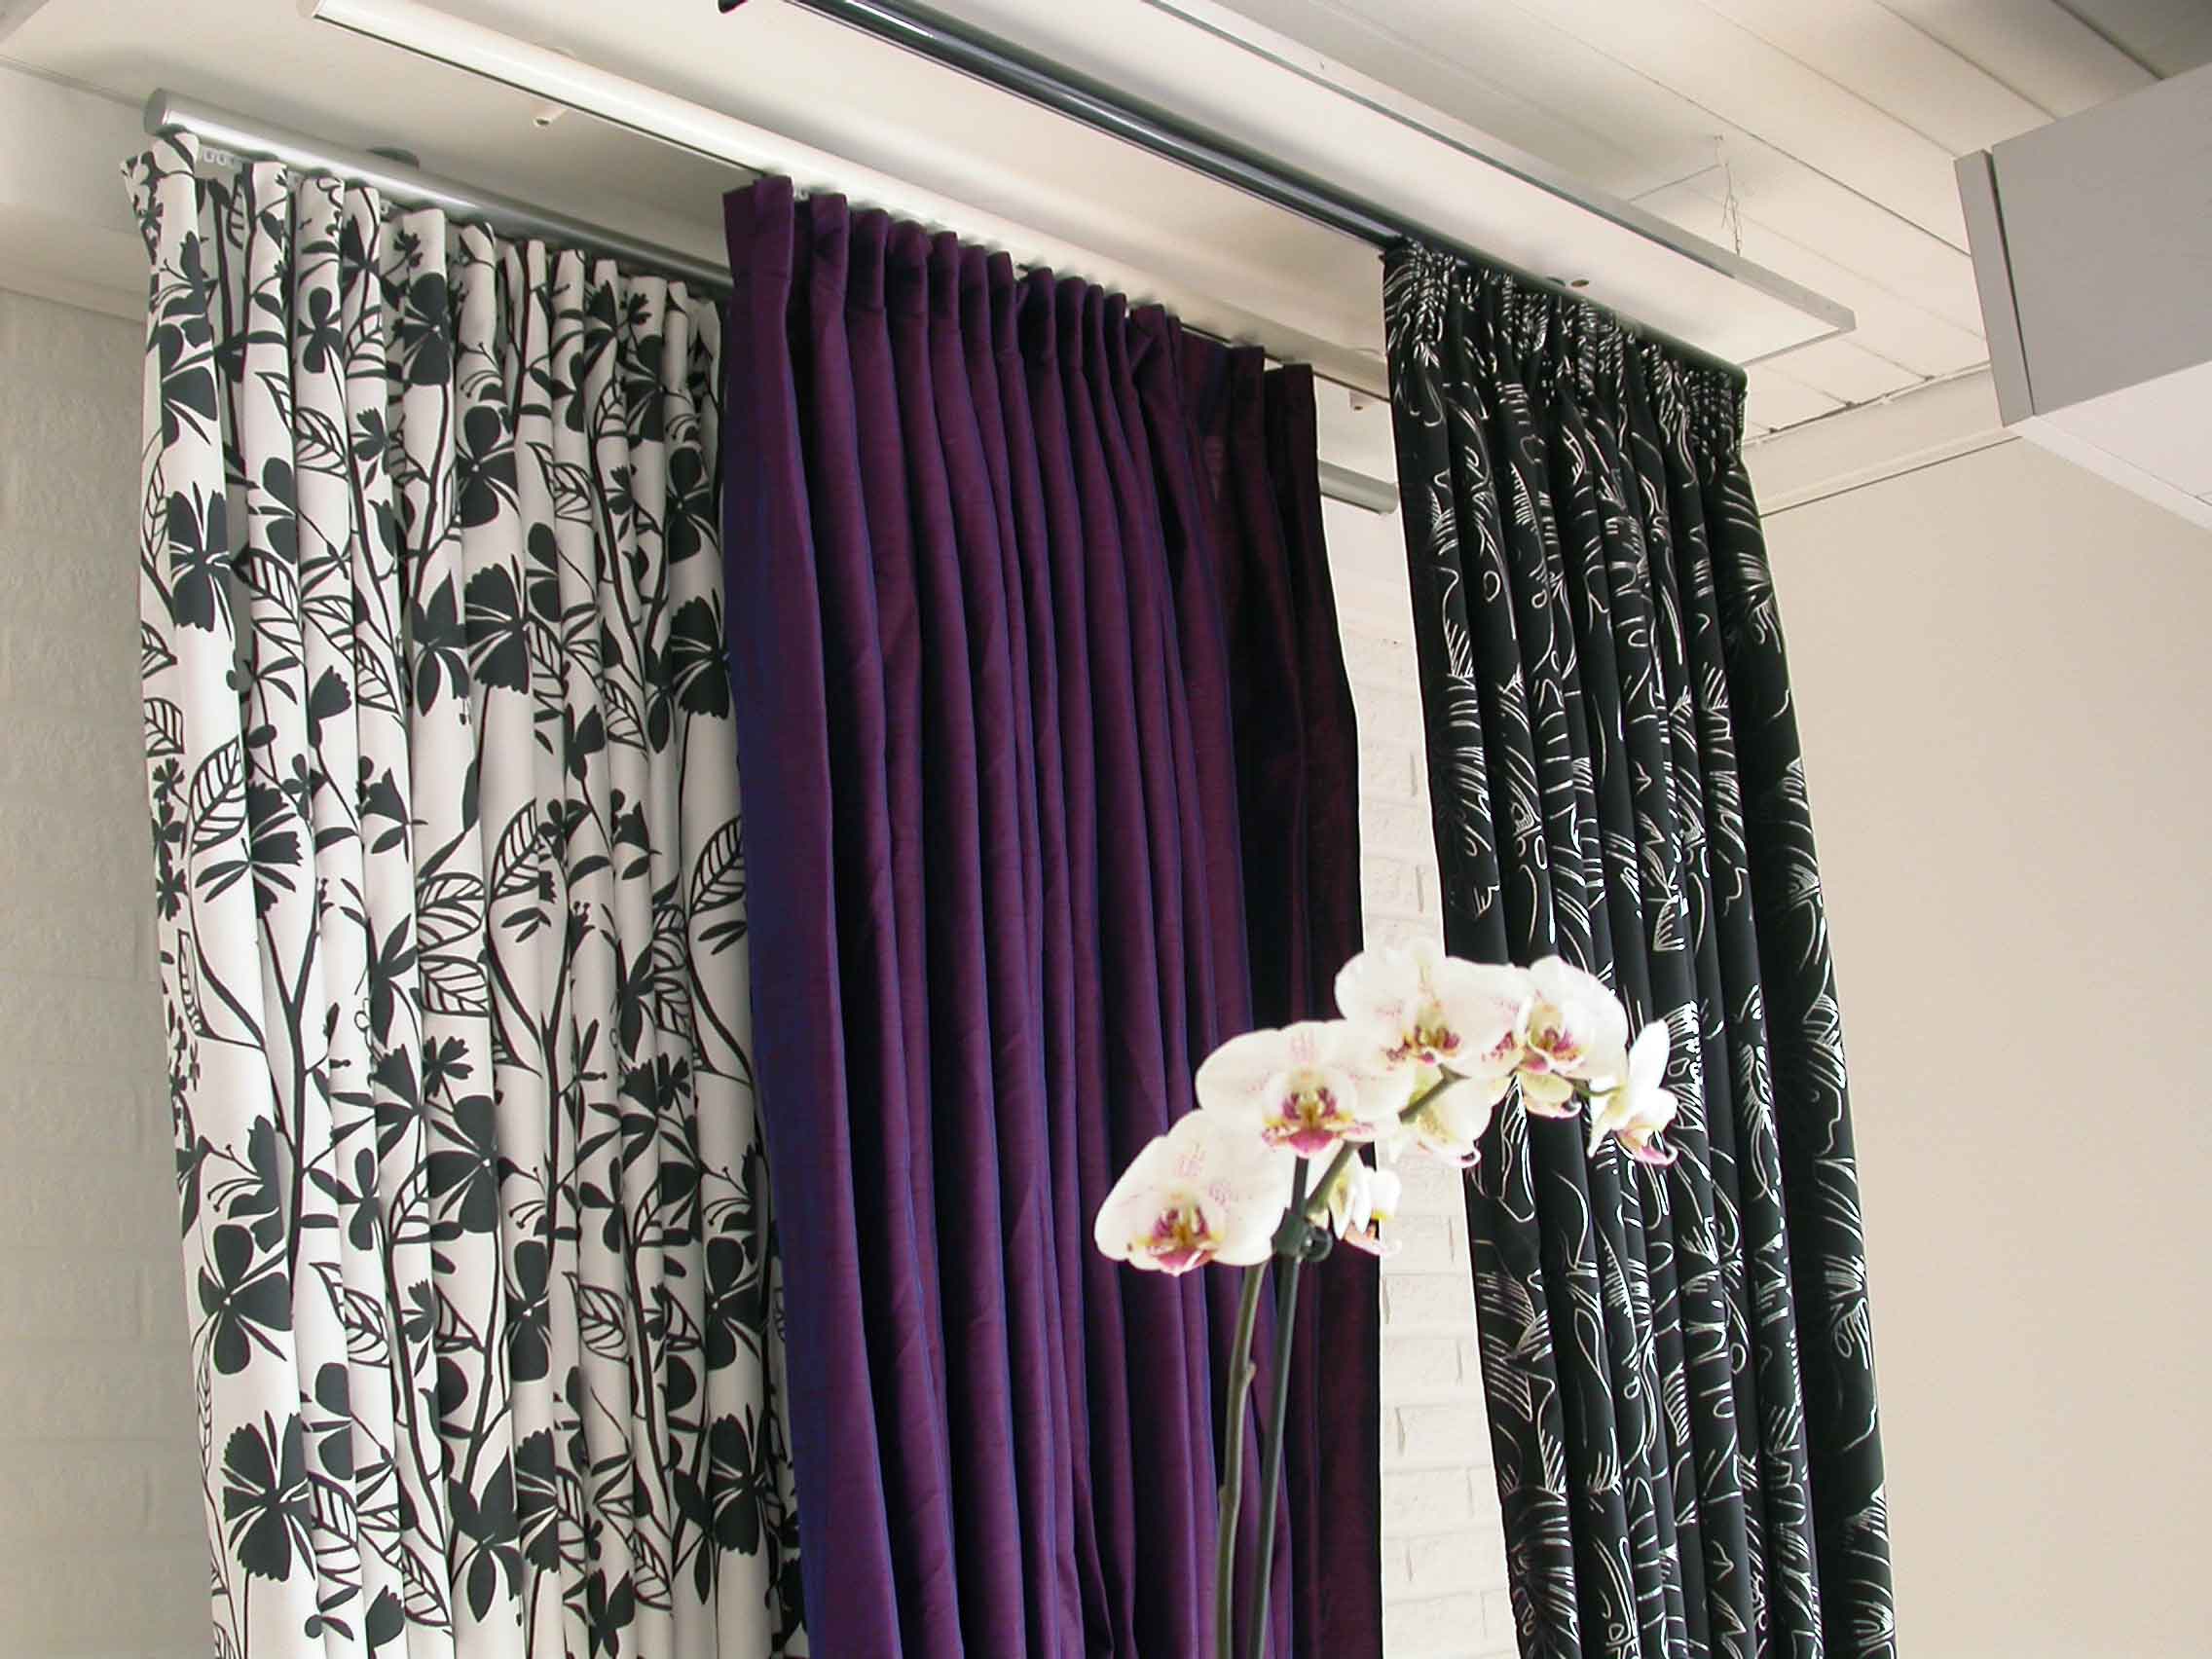 Classic curtain rods mounted in ceiling